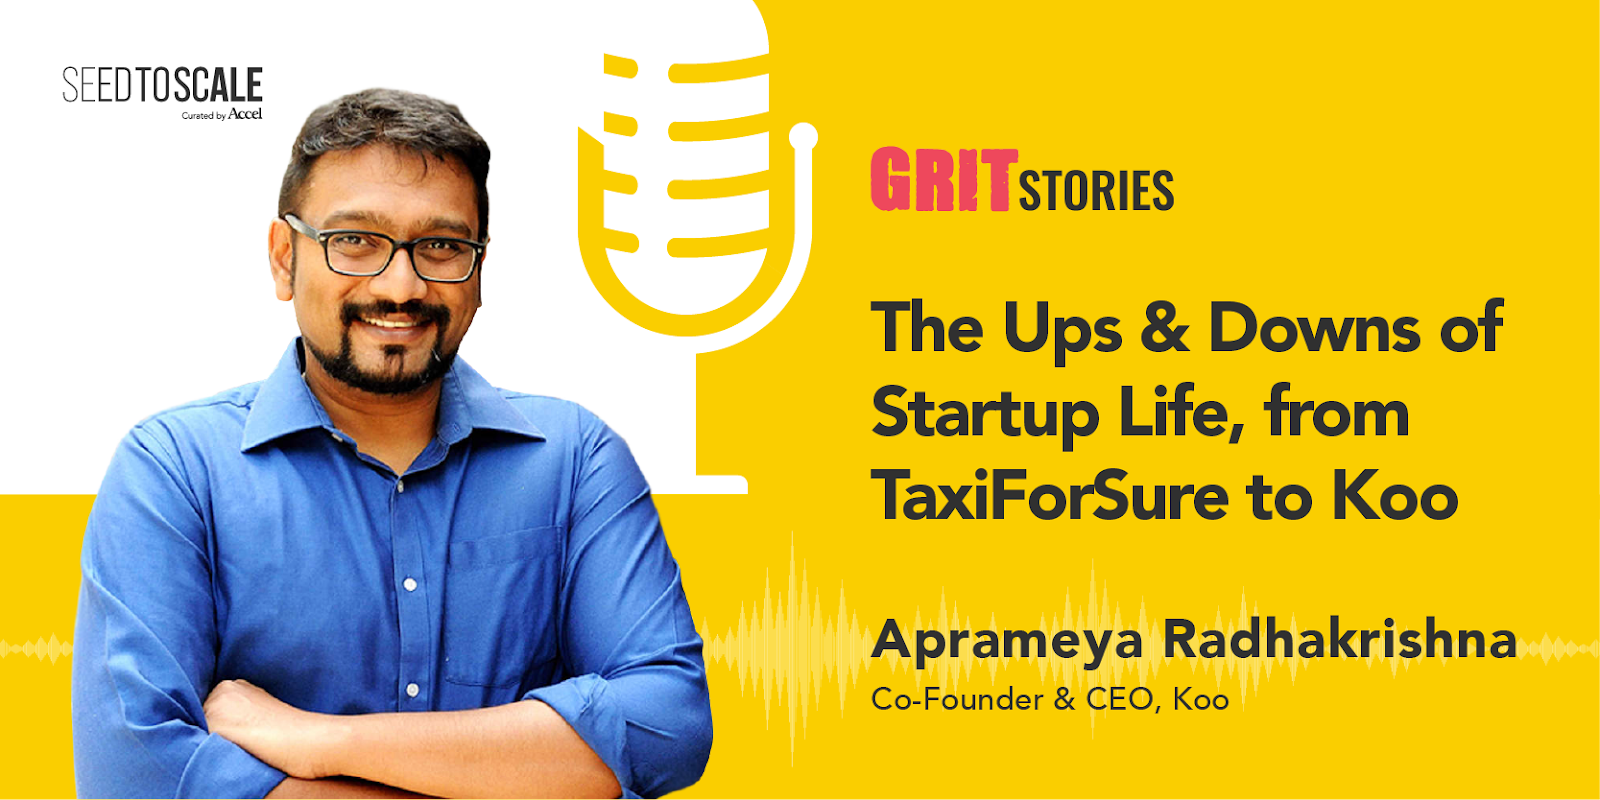 [Podcast] From TaxiForSure to Koo: The ups and downs in Aprameya Radhakrishna’s entrepreneurial life 